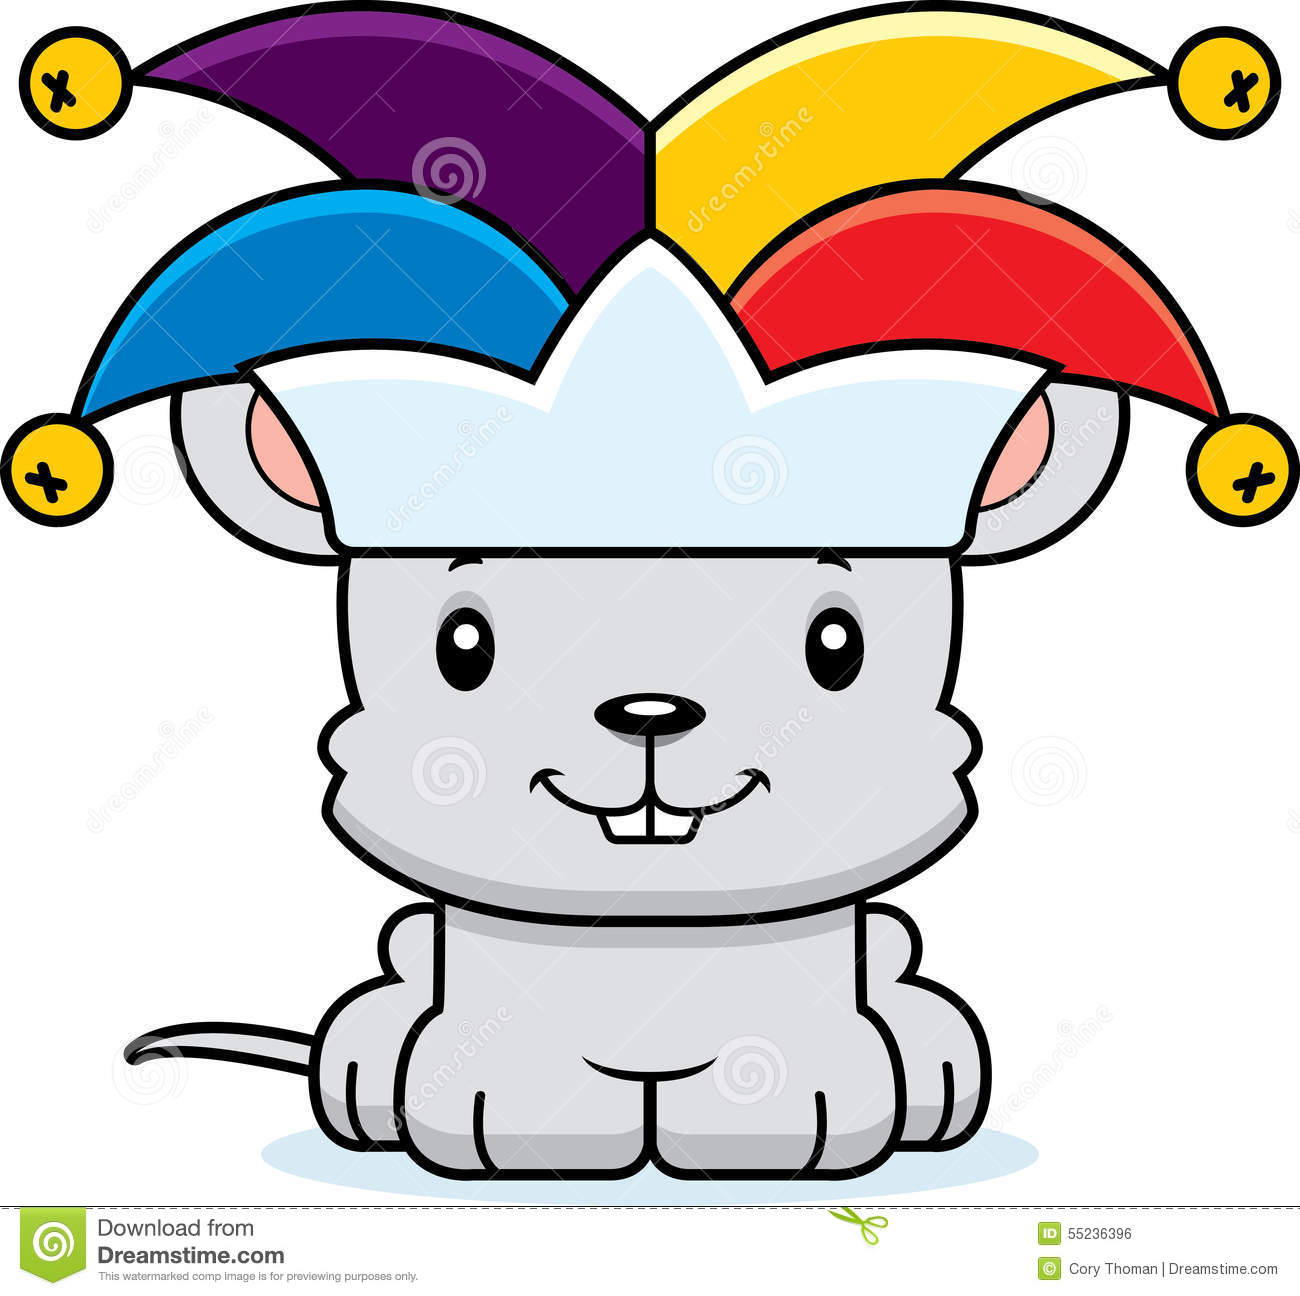 Cartoon Smiling Jester Mouse Stock Vector   Image  55236396